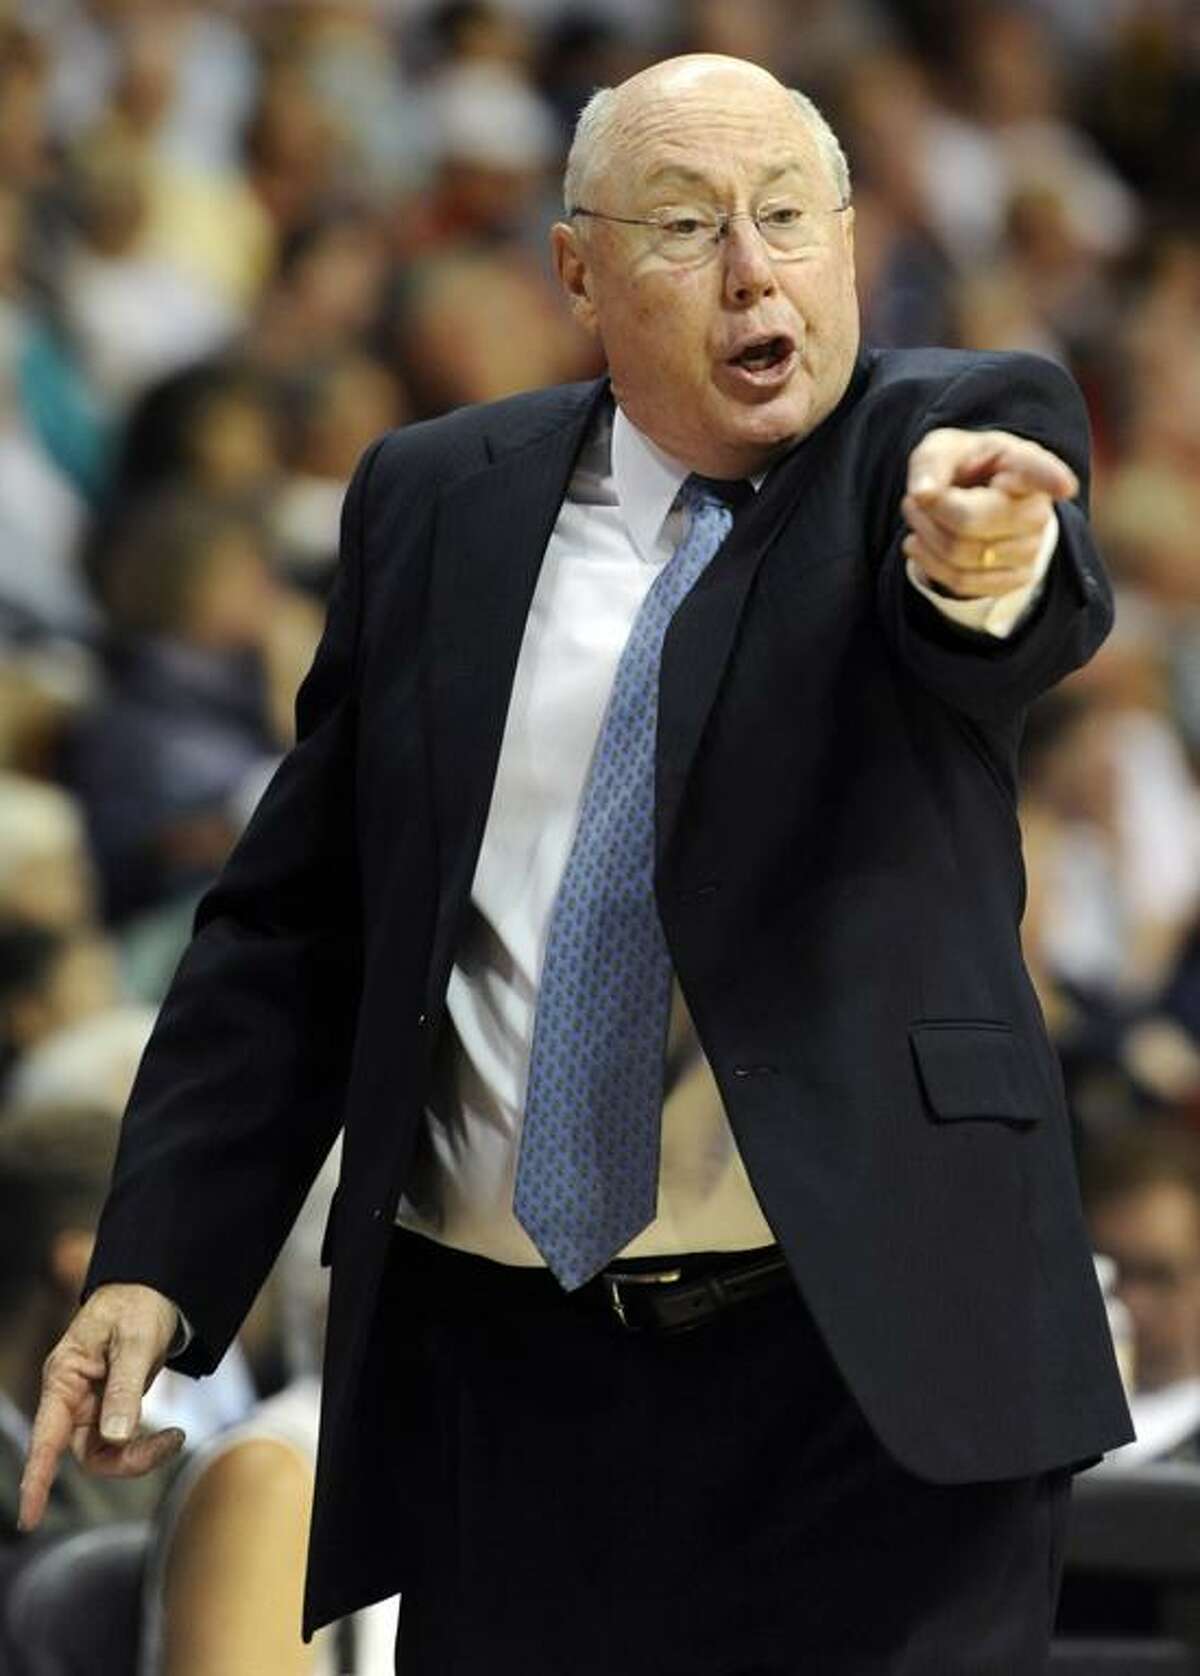 FILE - In this Aug. 21, 2012 file photo, Connecticut Sun head coach Mike Thibault reacts during the first half of a WNBA basketball game against the Tulsa Shock in Uncasville, Conn. The Sun fired Thibault and his assistants Tuesday, Nov. 20, 2012. Thibault, who led the team to eight playoff appearances, but no WNBA championships in his 10 seasons with the franchise, had been the SunÕs only head coach, hired when the team relocated from Orlando prior to the 2003 season. (AP Photo/Jessica Hill, File)